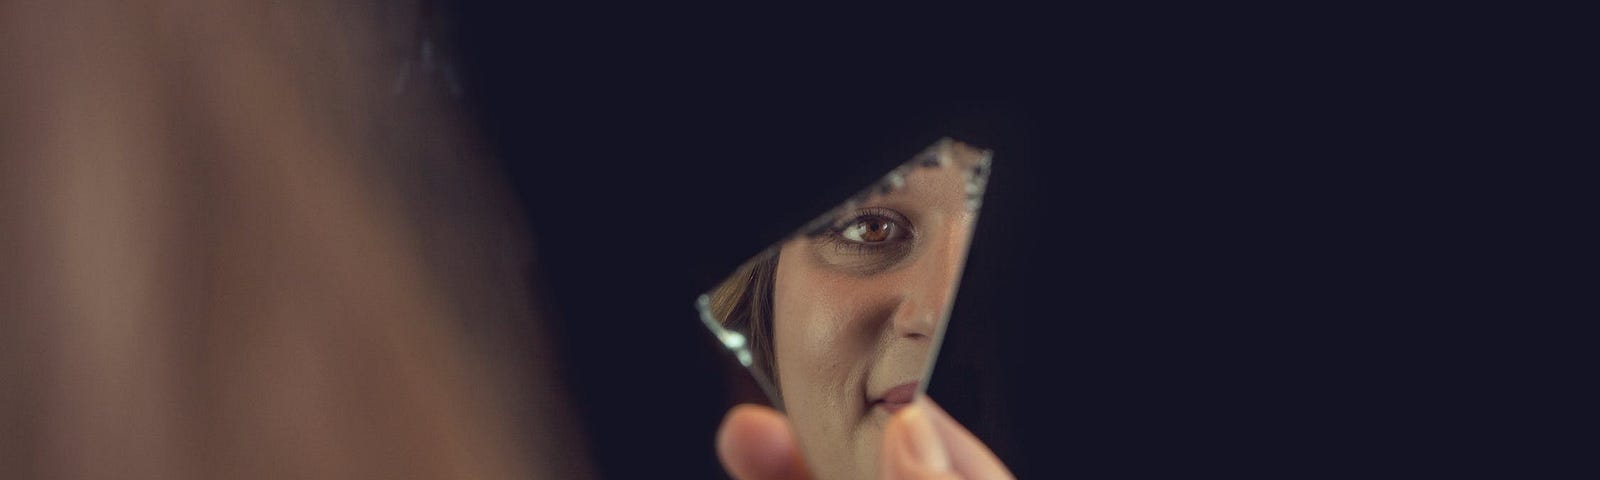 Person Holding a Piece of Broken Mirror with Reflection